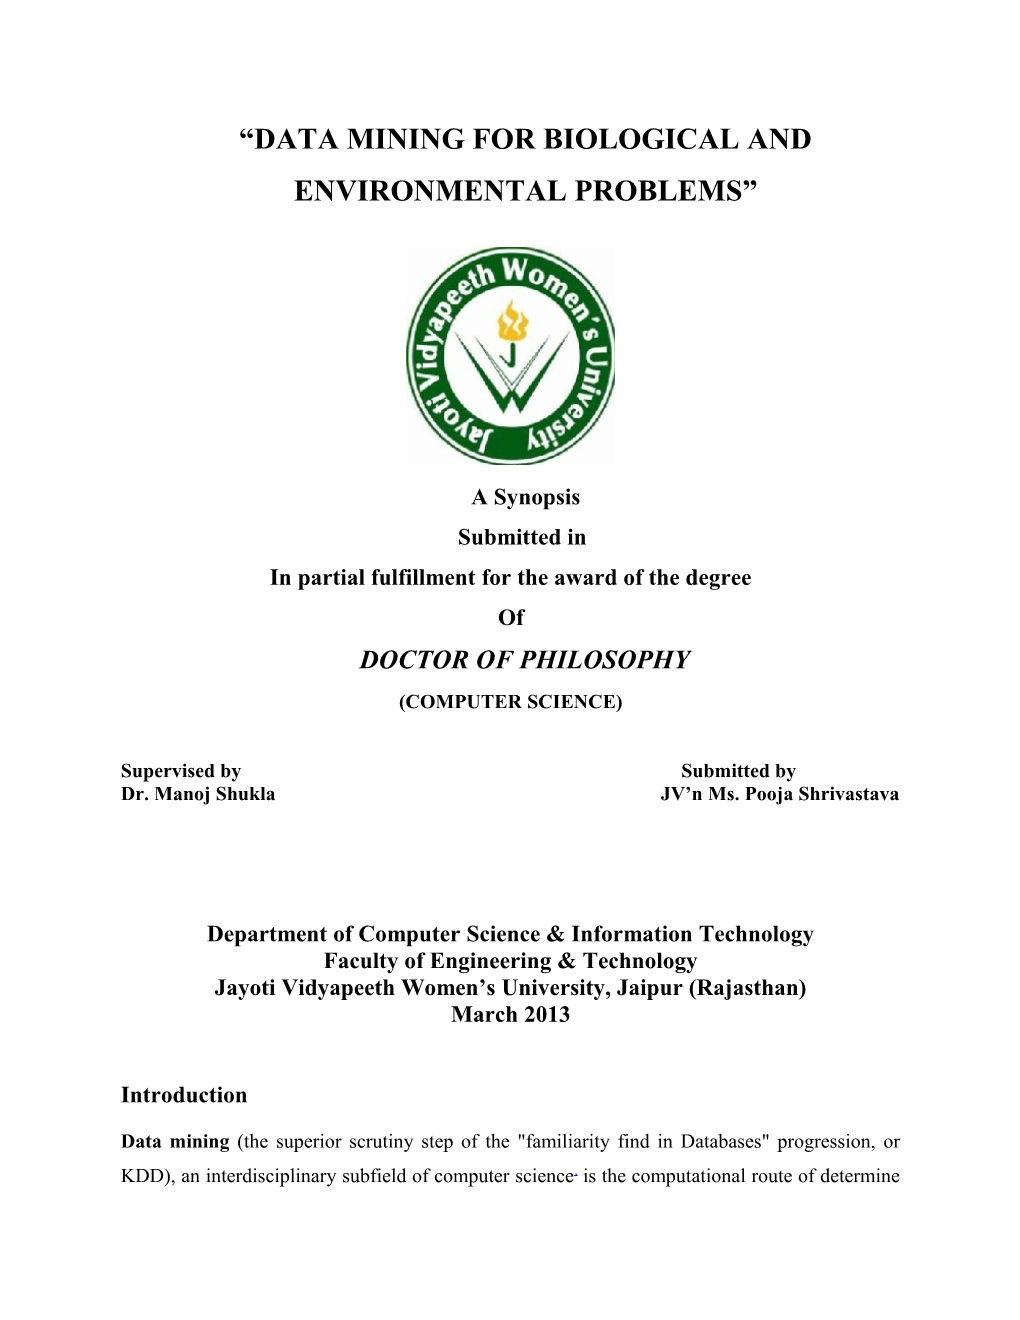 Data Mining for Biological and Environmental Problems